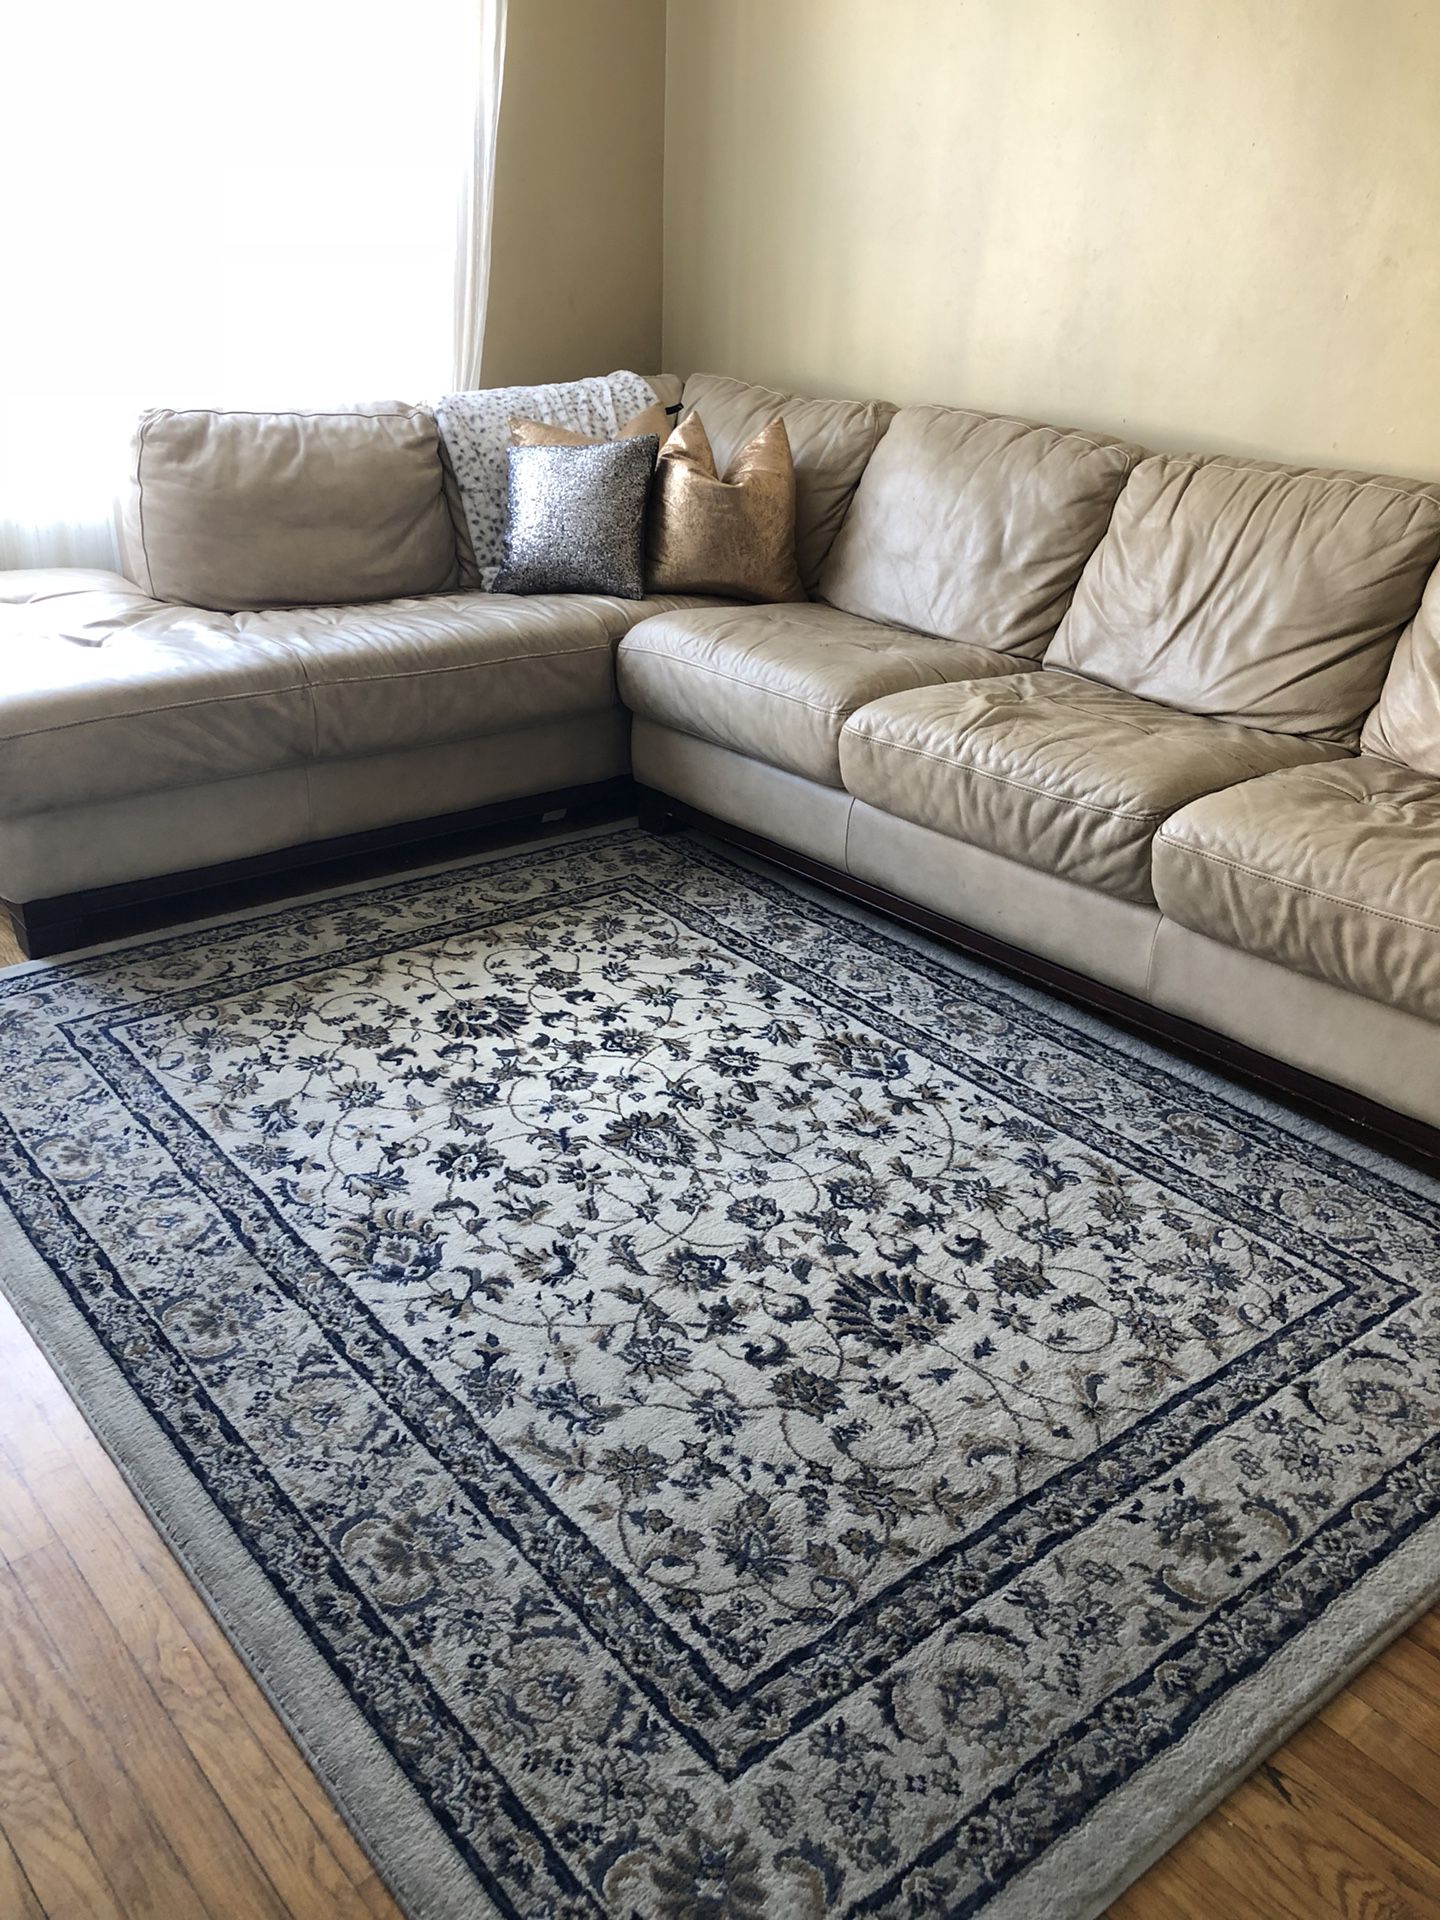 Ruggable Rug Pad 5x7 Size New for Sale in San Diego, CA - OfferUp